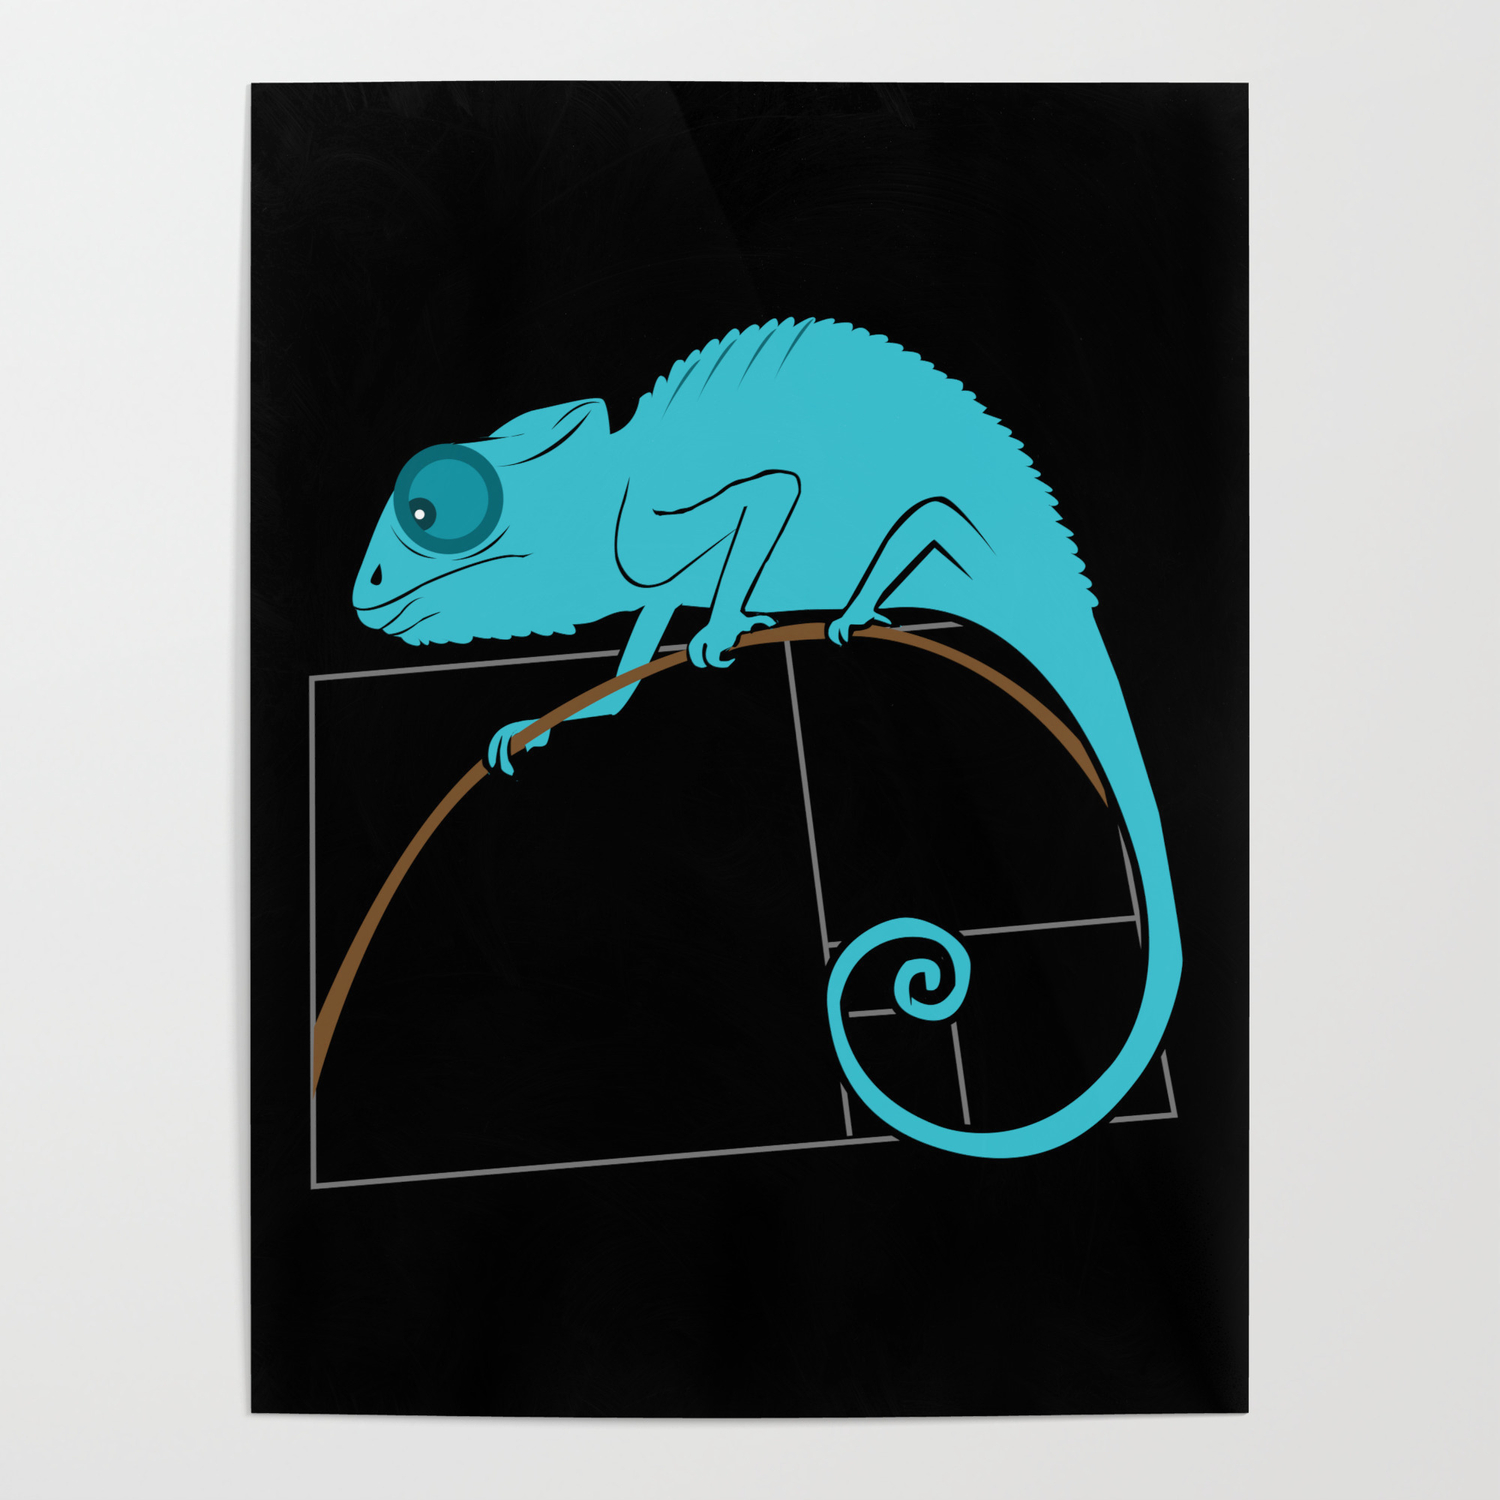 Fibonacci Sequence Golden Ratio Spiral Gift Poster by Alex211 | Society6